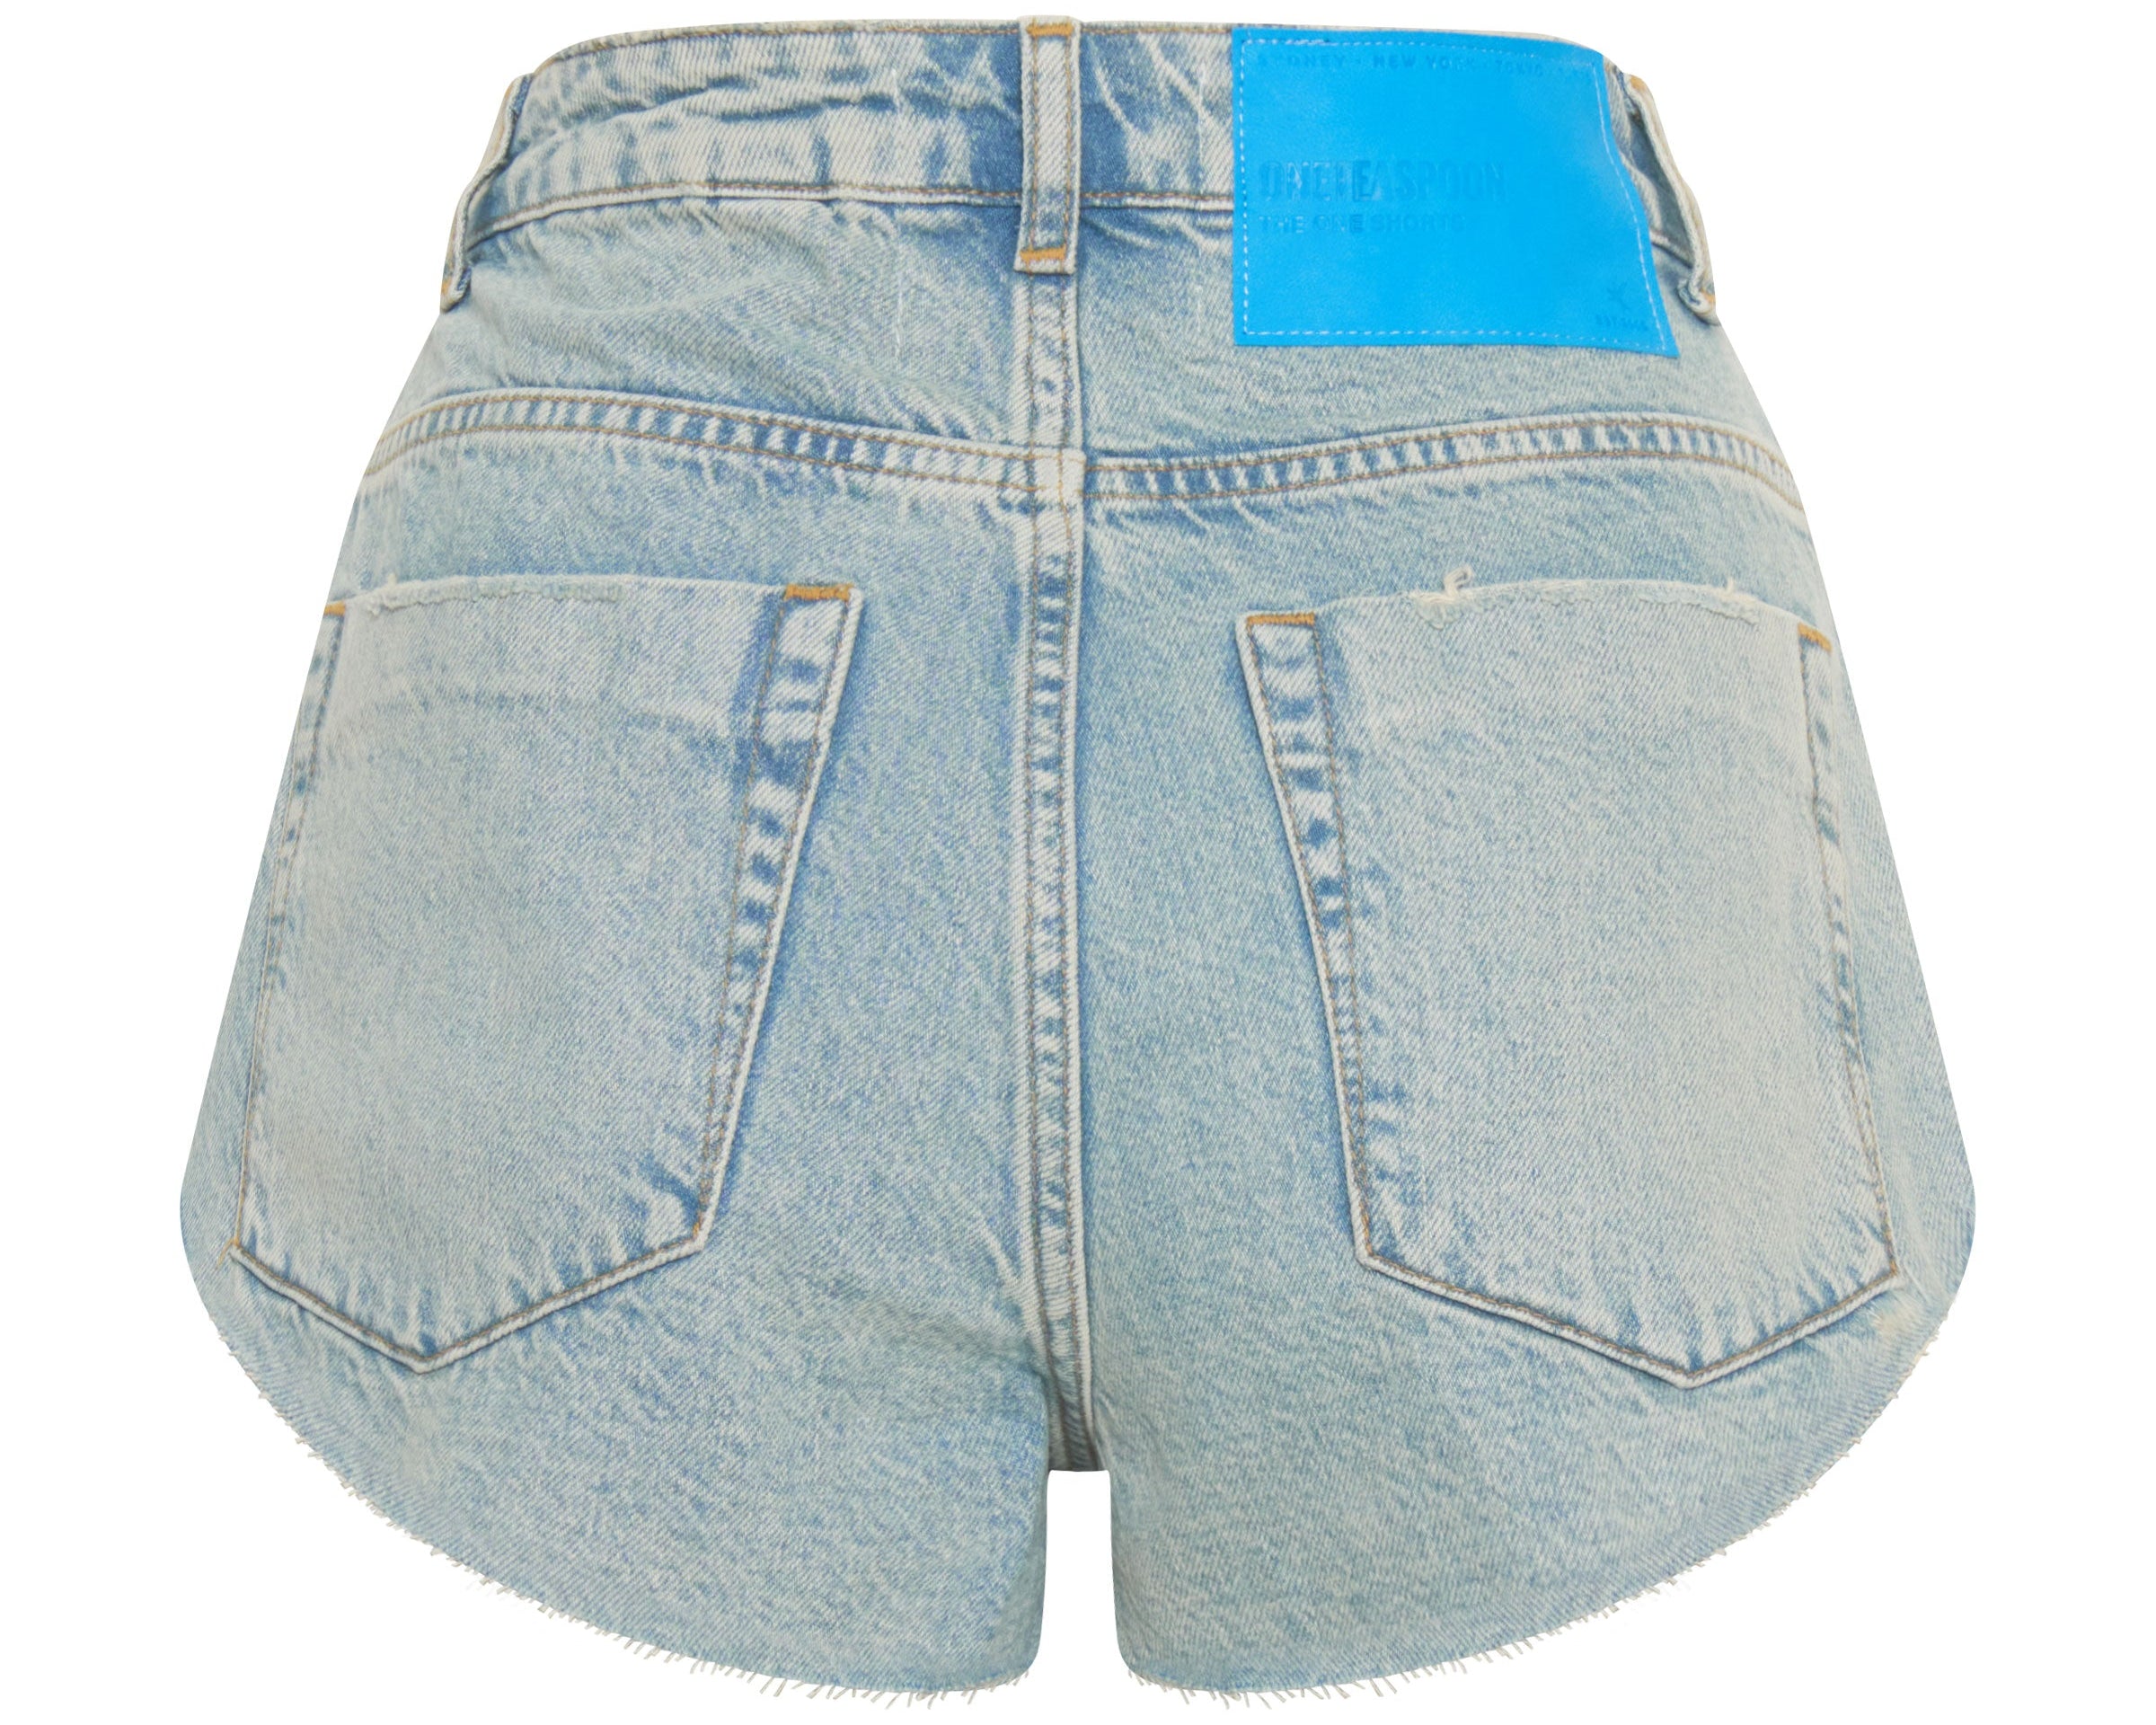 KANSAS ACID THE ONE FITTED CHEEKY DENIM SHORT